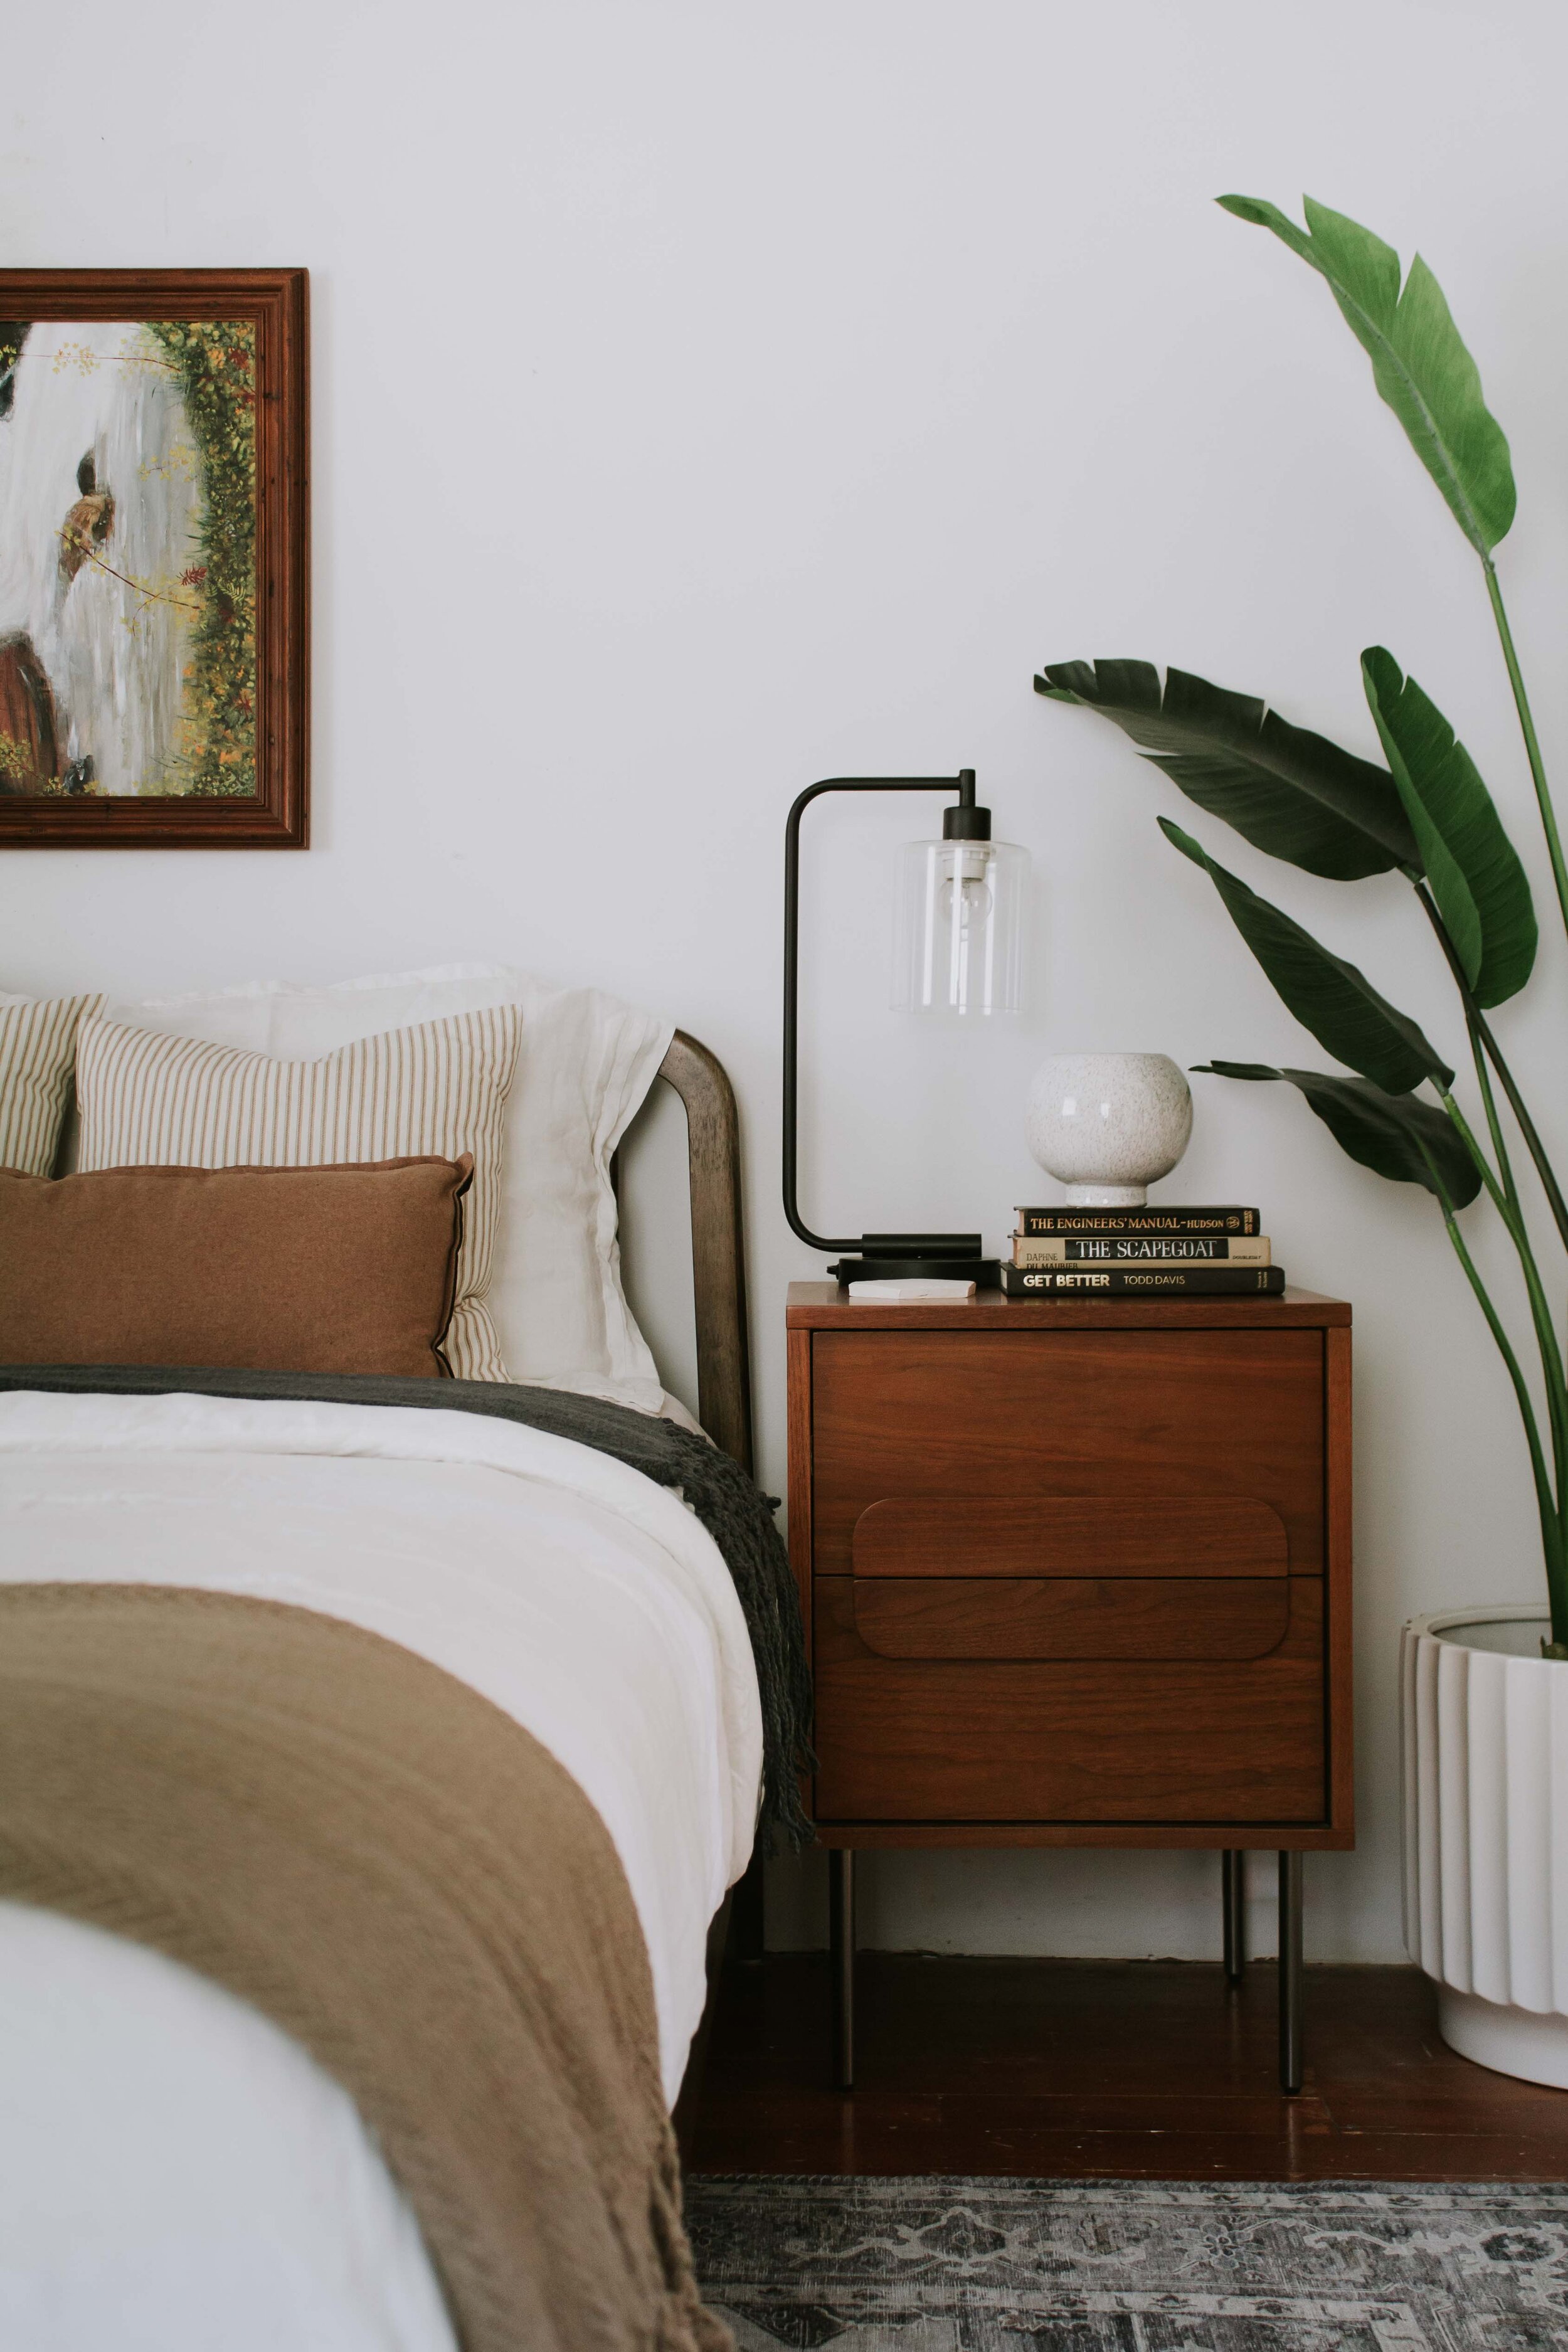 Our Bedroom "As Is" and 9 spindle bed alternatives - modern traditional bedroom decor and cozy bedroom inspiration. | Nadine Stay